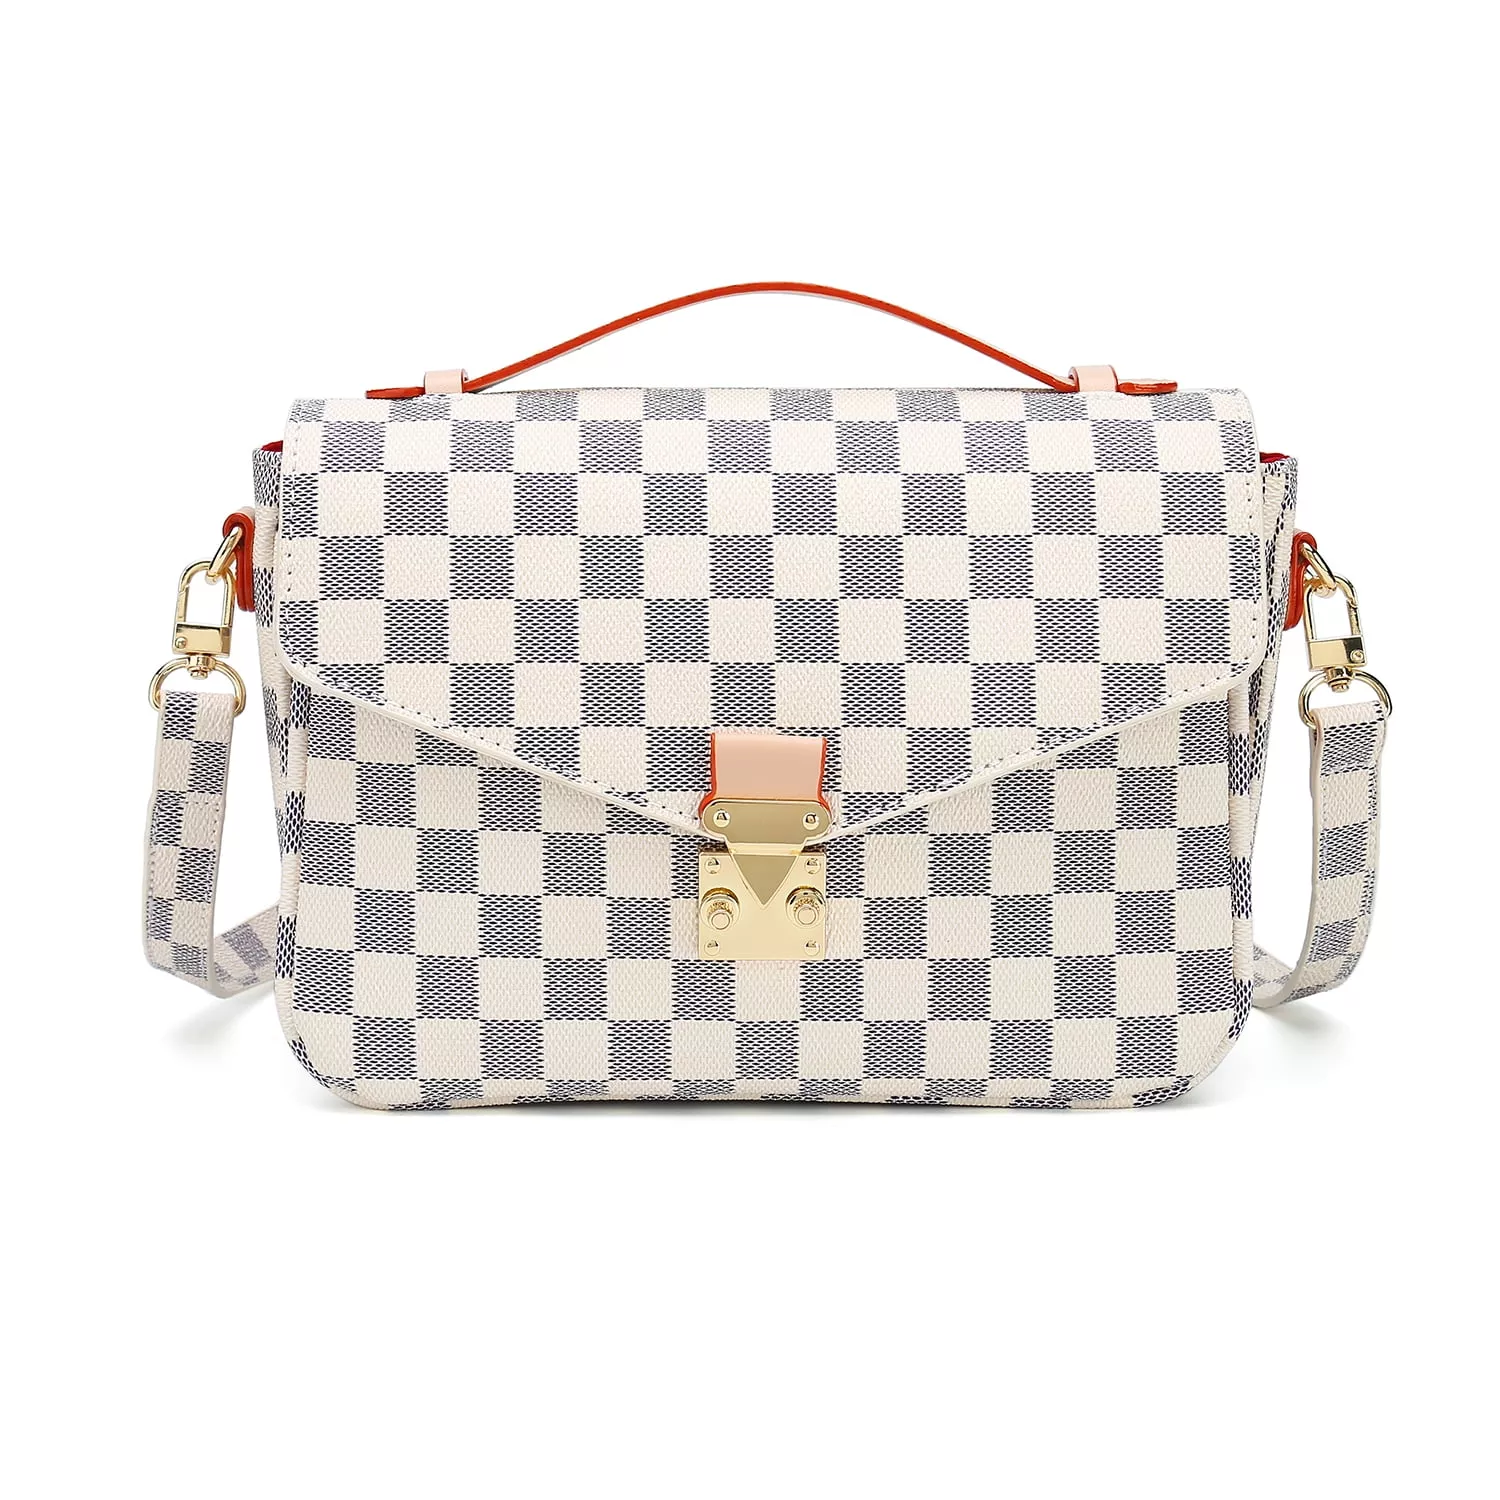 Sexydance (White) Women Checkered Tote Shoulder Bag Purse PU Leather Handbag Bag with Inne